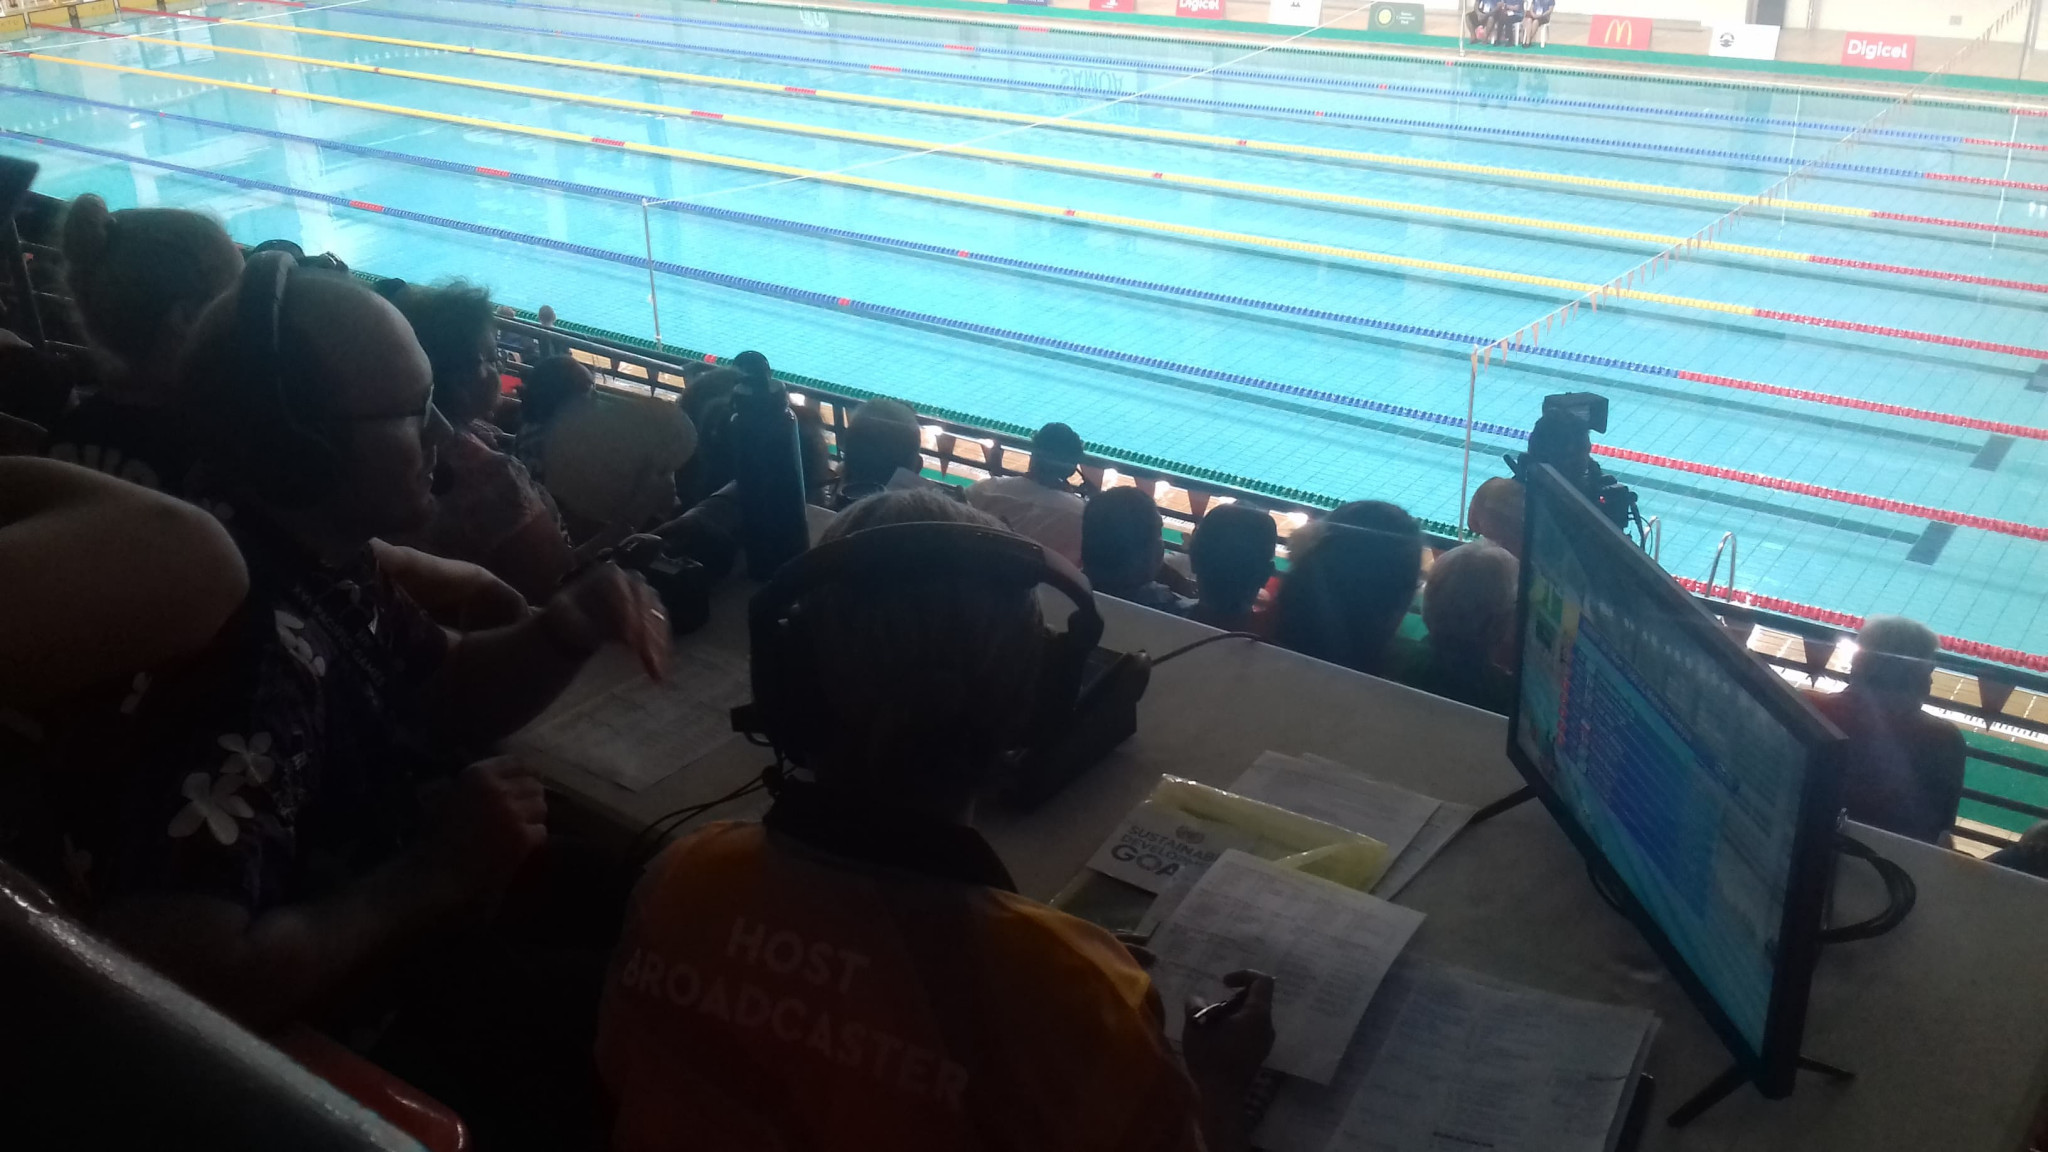 Ryan Pini, left, was co-commentating when his men's individual medal Games record was broken ©ITG